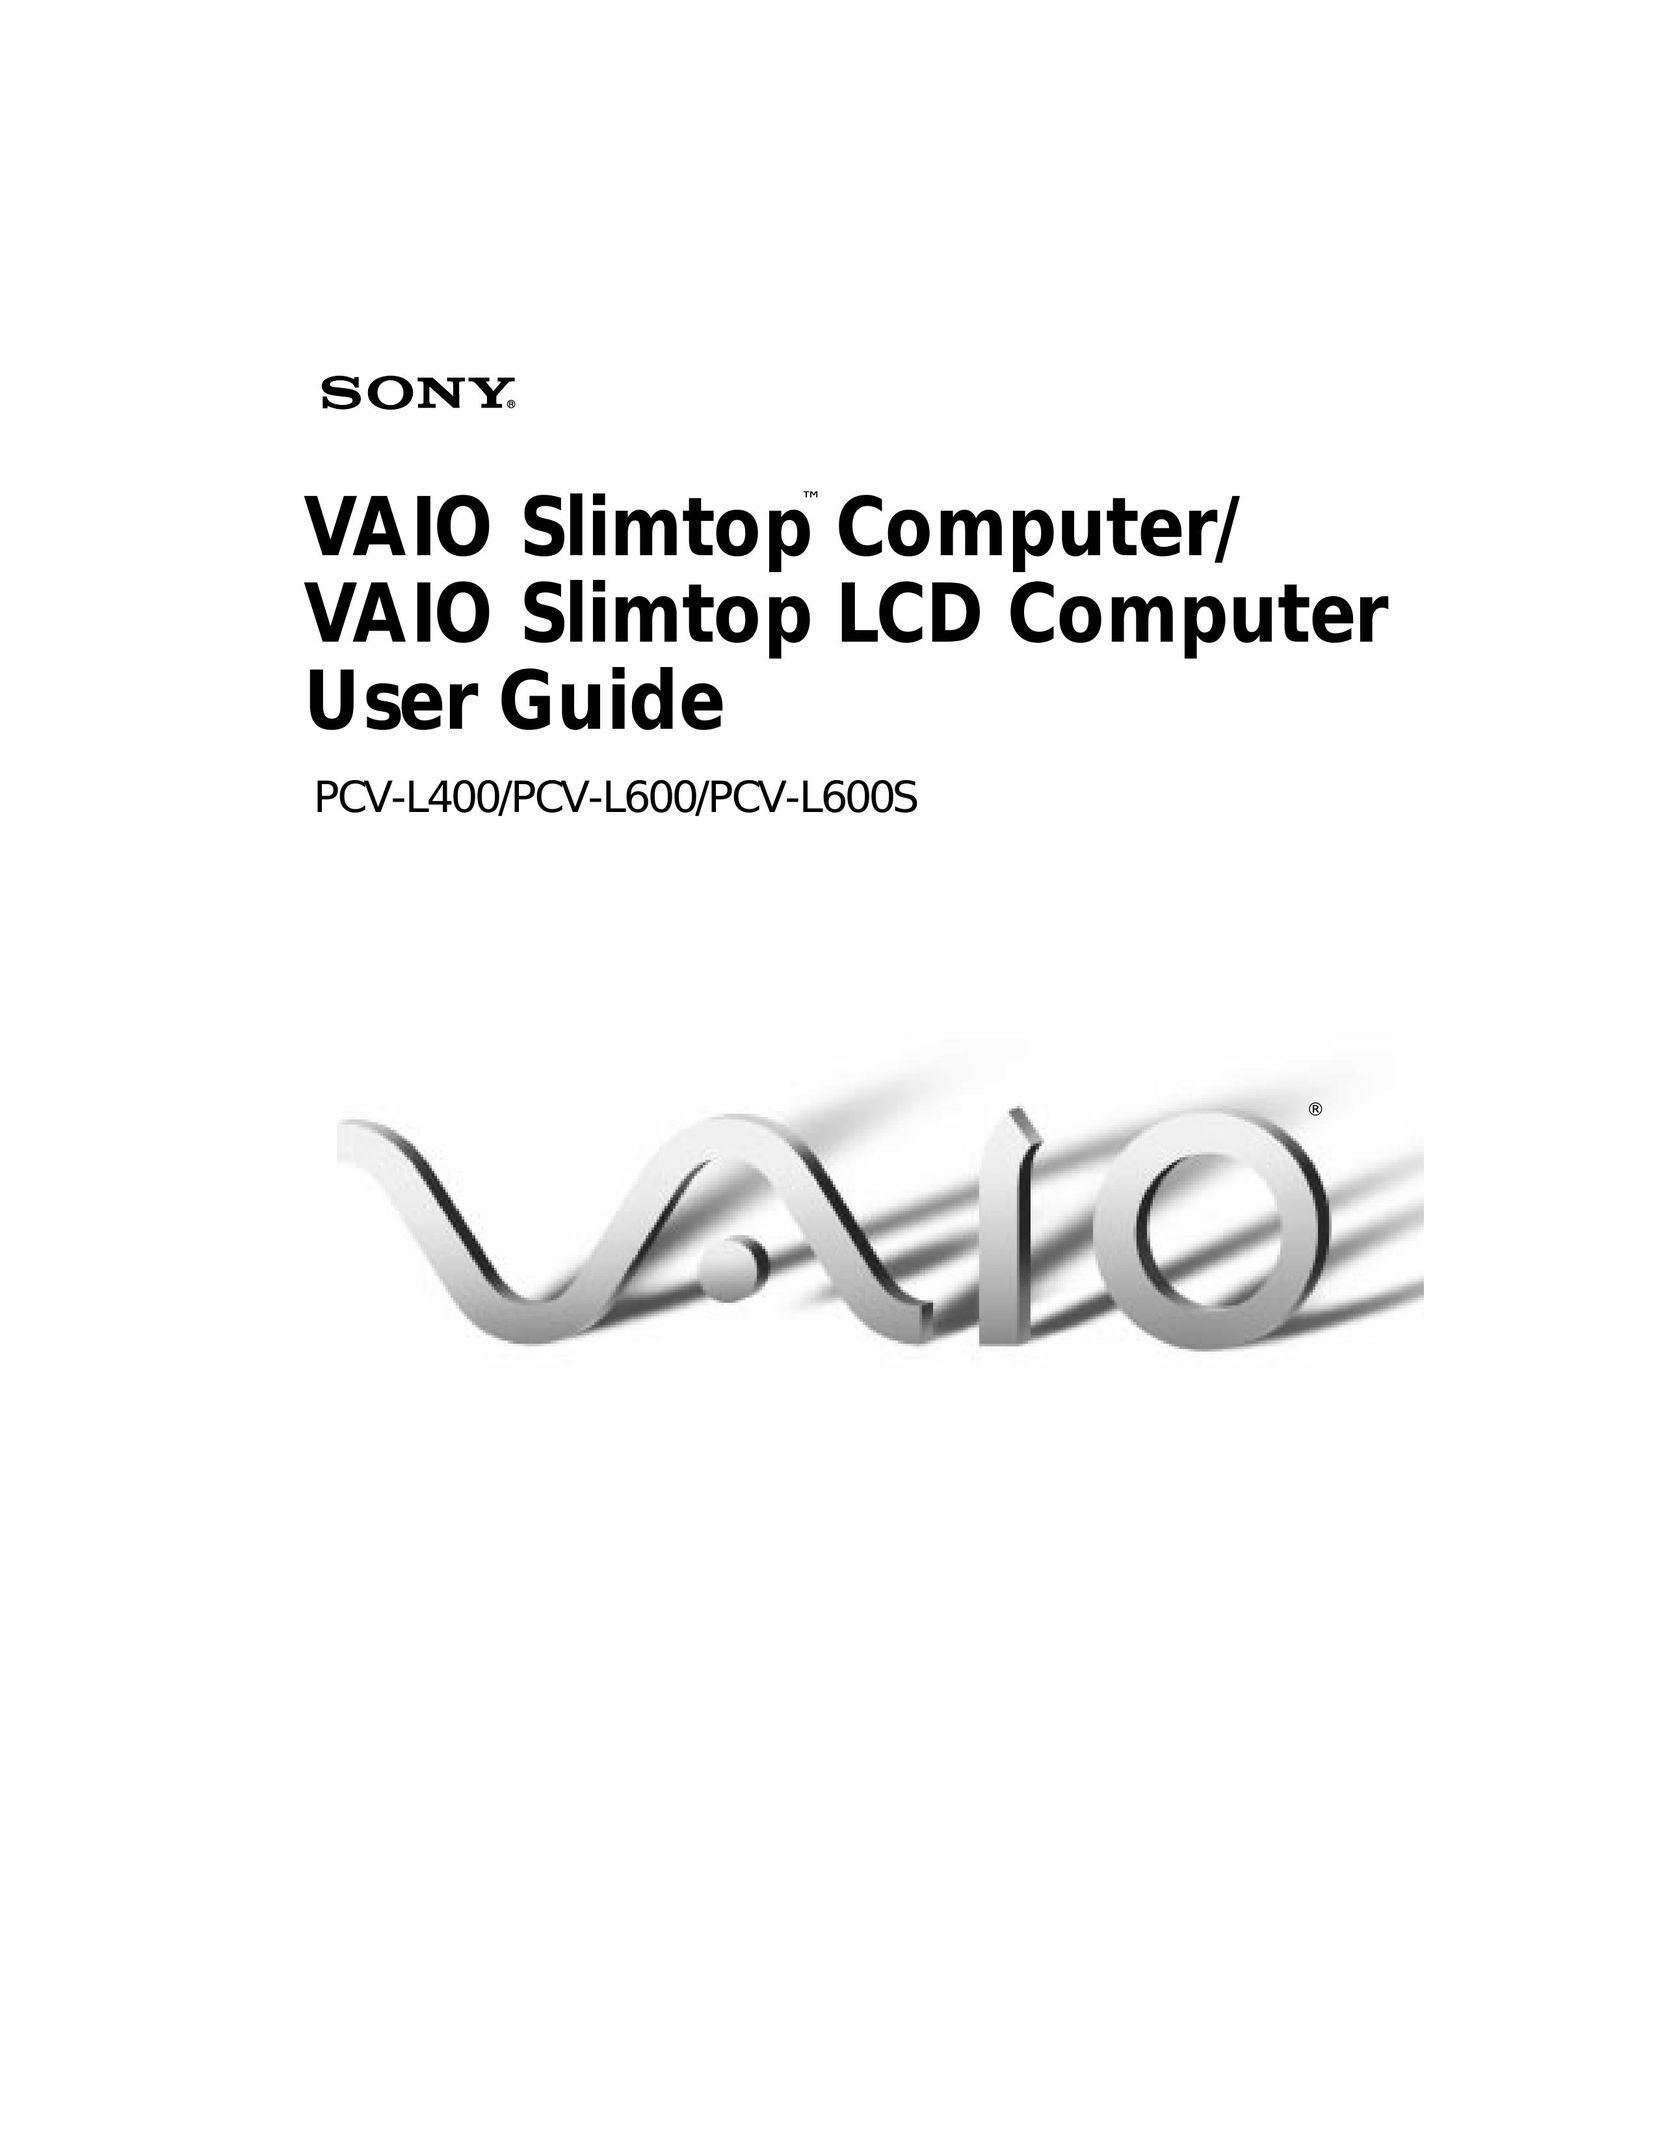 Sony PCV-L600S Personal Computer User Manual